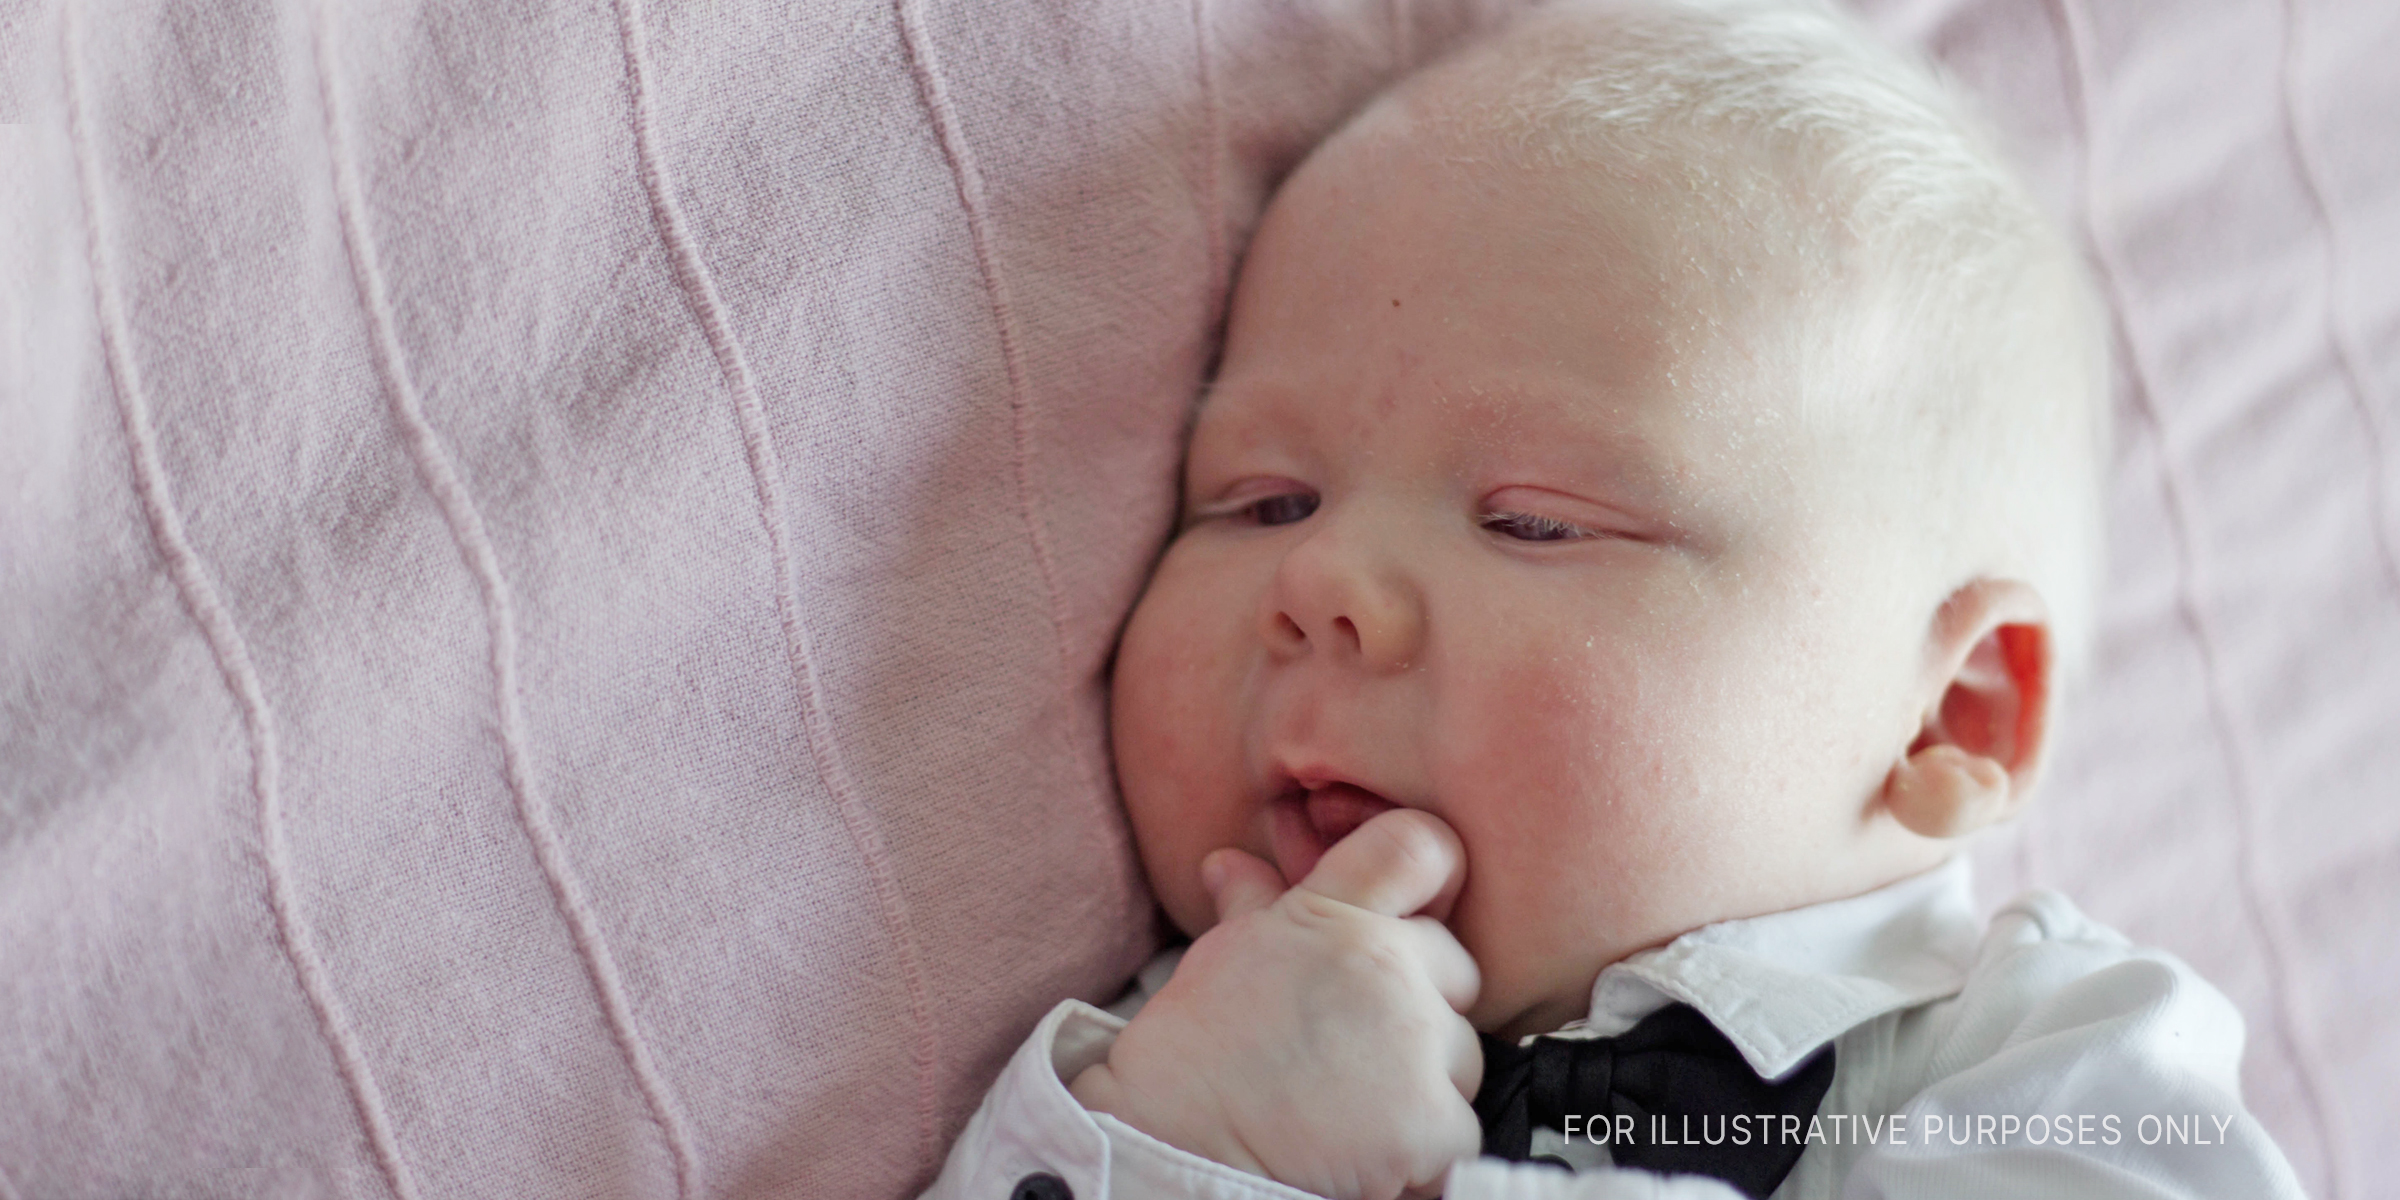 Baby with albinism lying on blanket | Source: Shutterstock